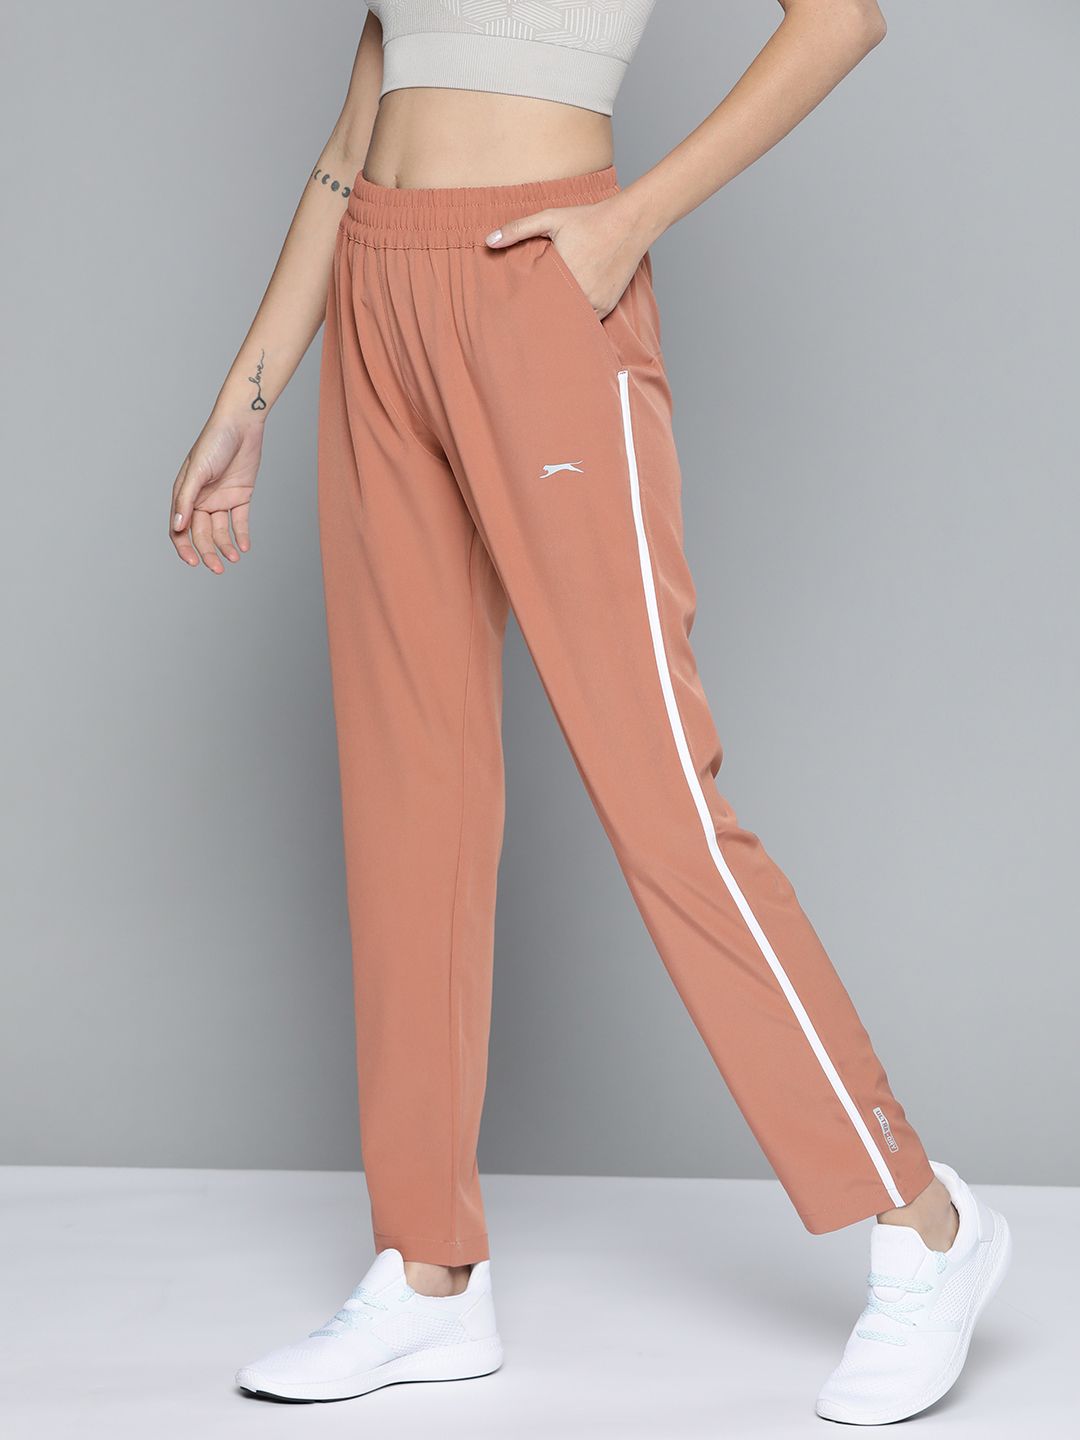 Slazenger Women Dusty Pink Solid Running Track Pants with Side Stripe Detail Price in India